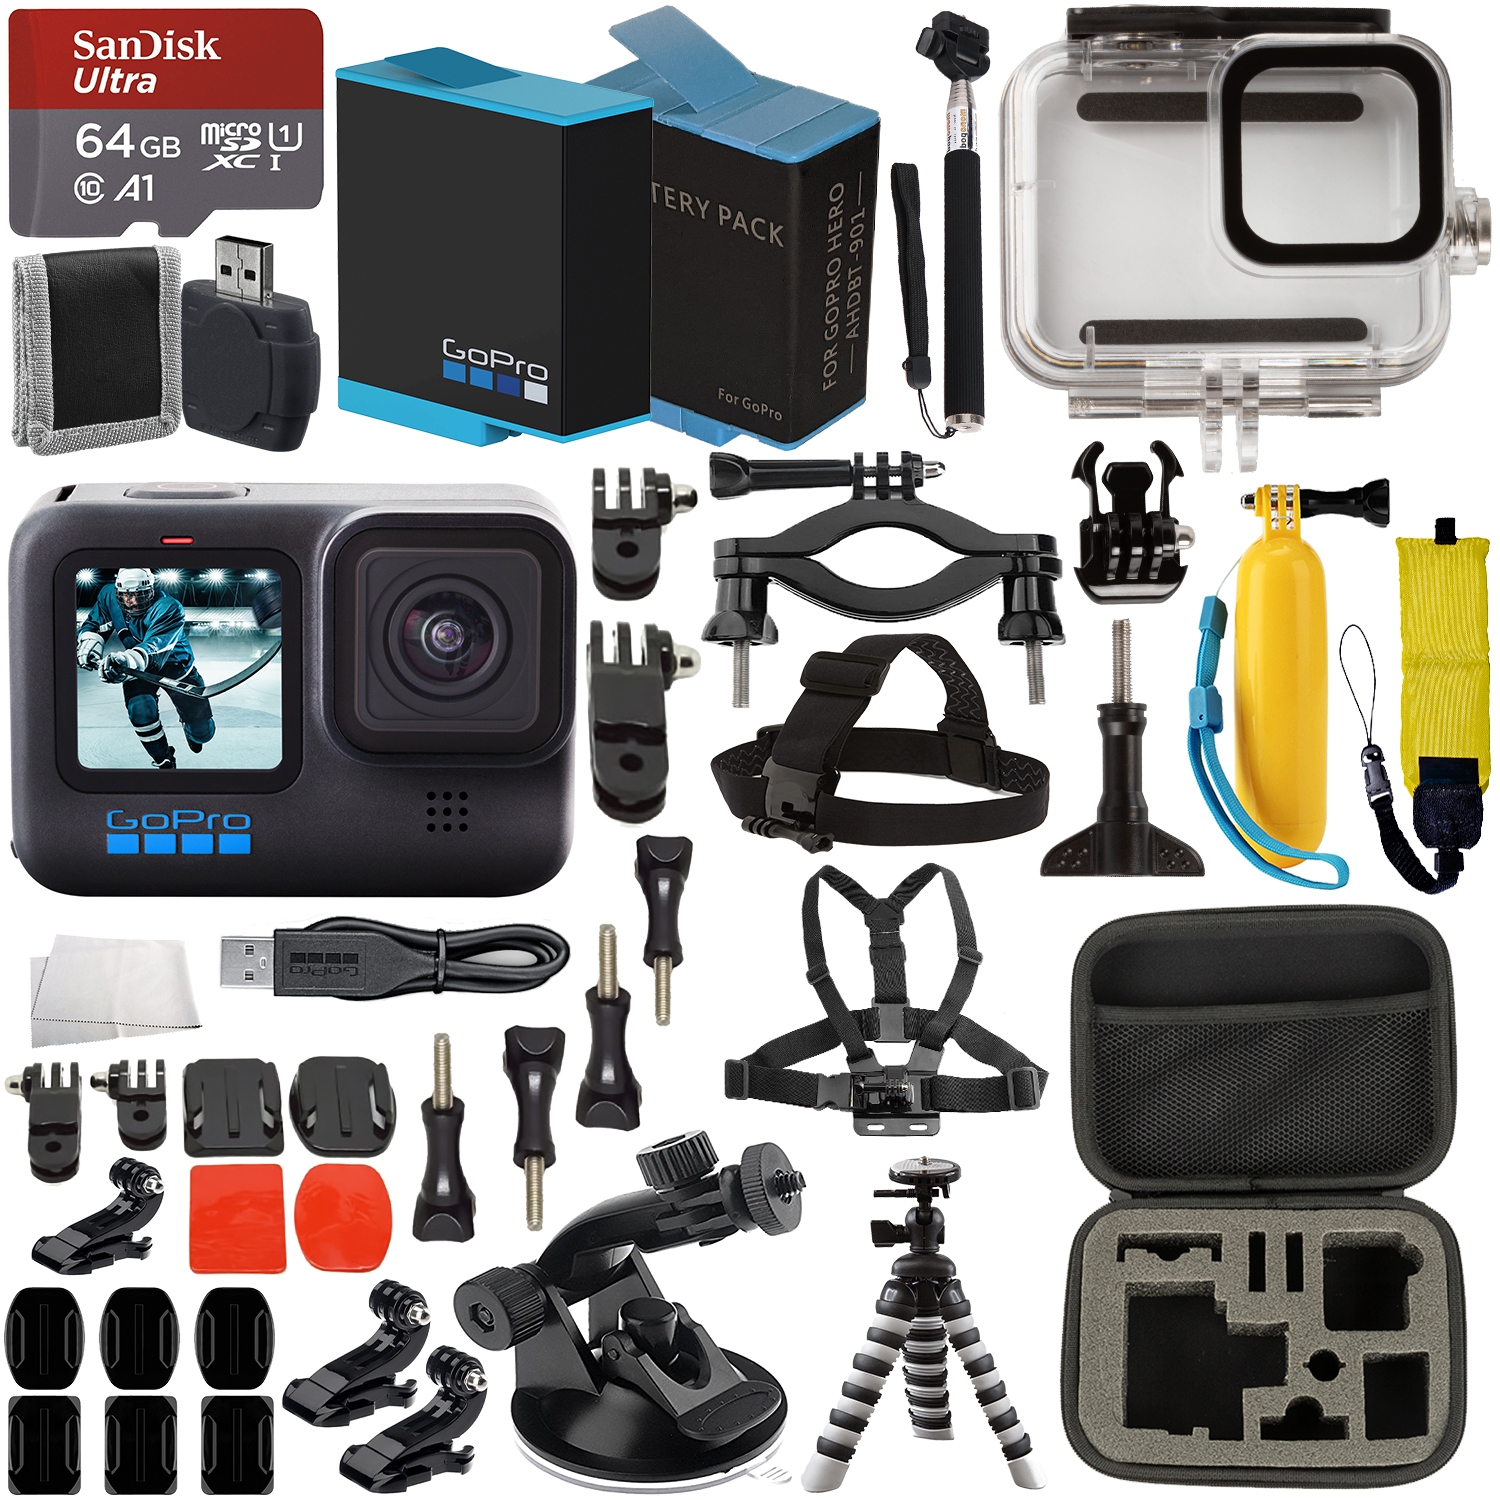 GoPro HERO10 (Hero 10) Black with Premium Accessory Bundle: SanDisk Ultra 64GB microSD Memory Card, Replacement Battery, Underwater Housing, Protective Case & Much More